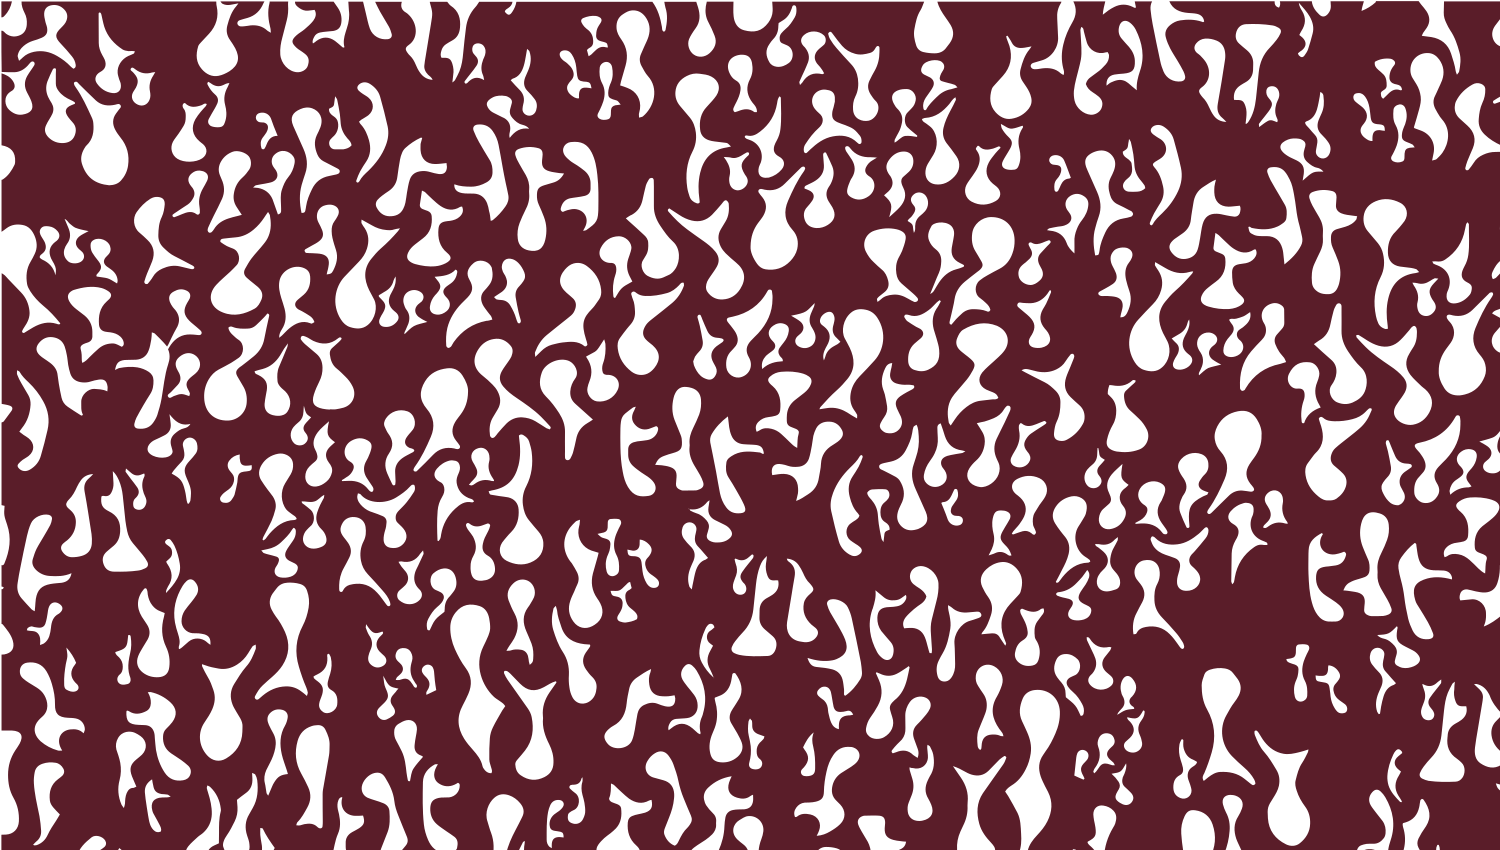 Parasoleil™ Dublevey© pattern displayed with a burgundy color overlay